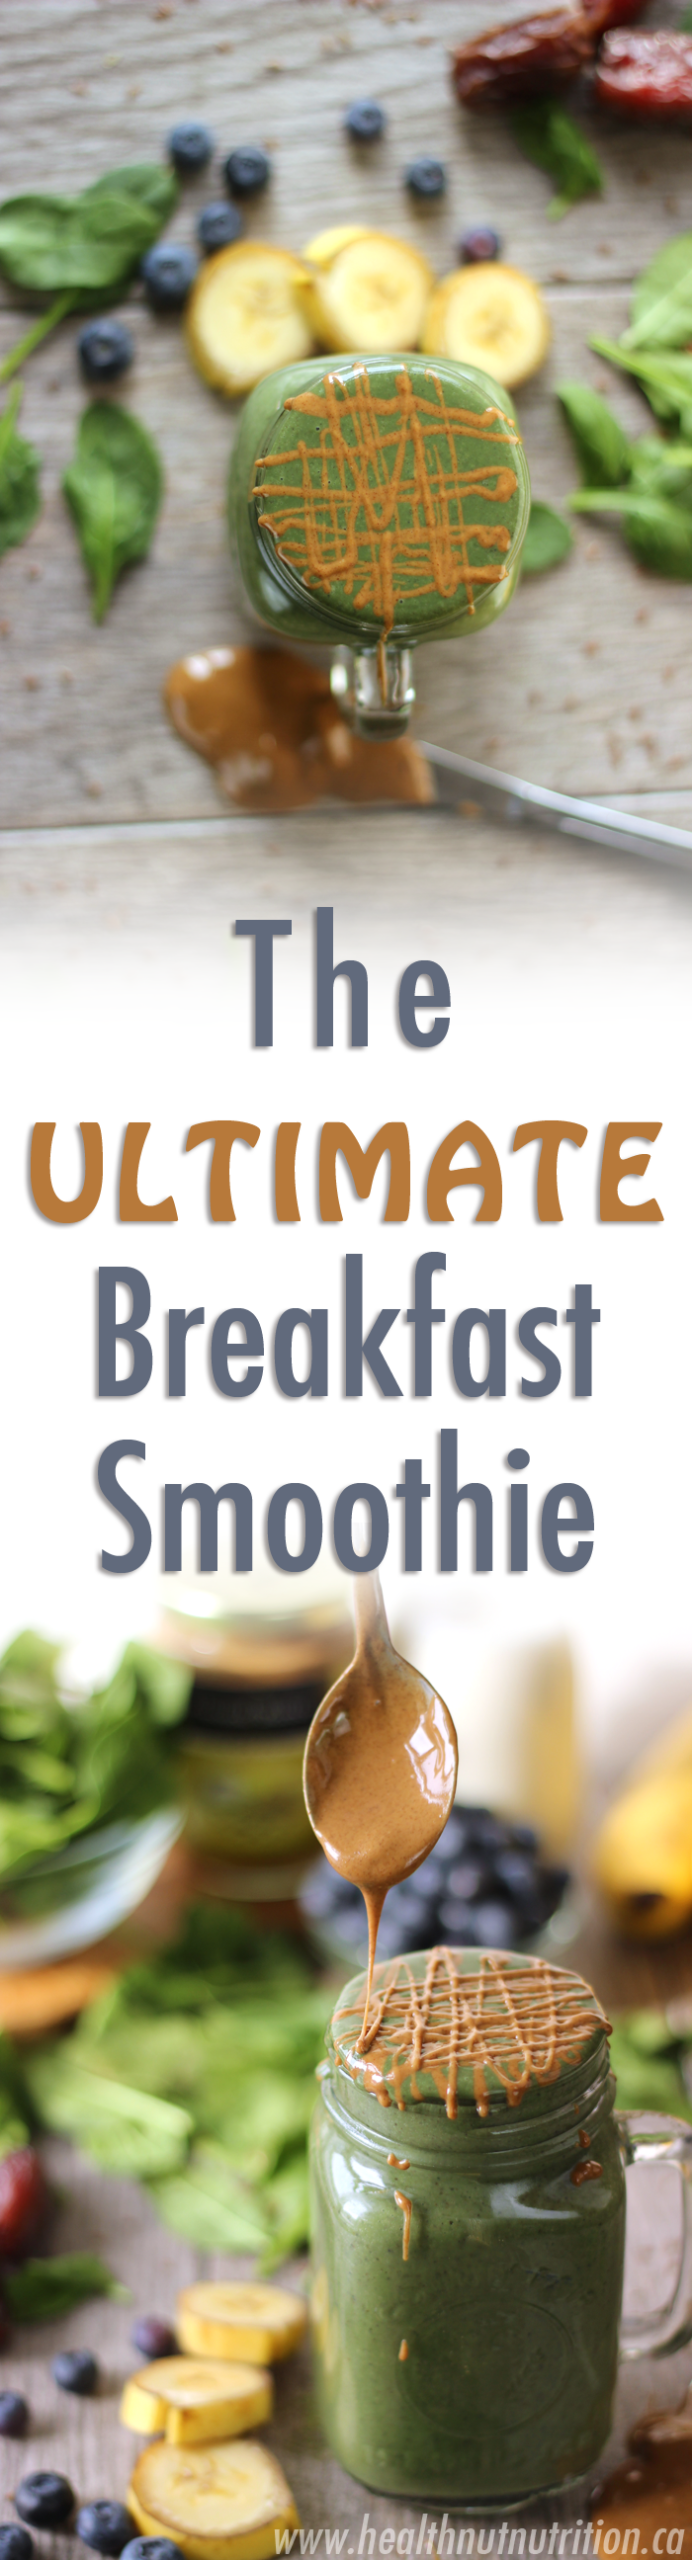 The ULTIMATE Breakfast Smoothie